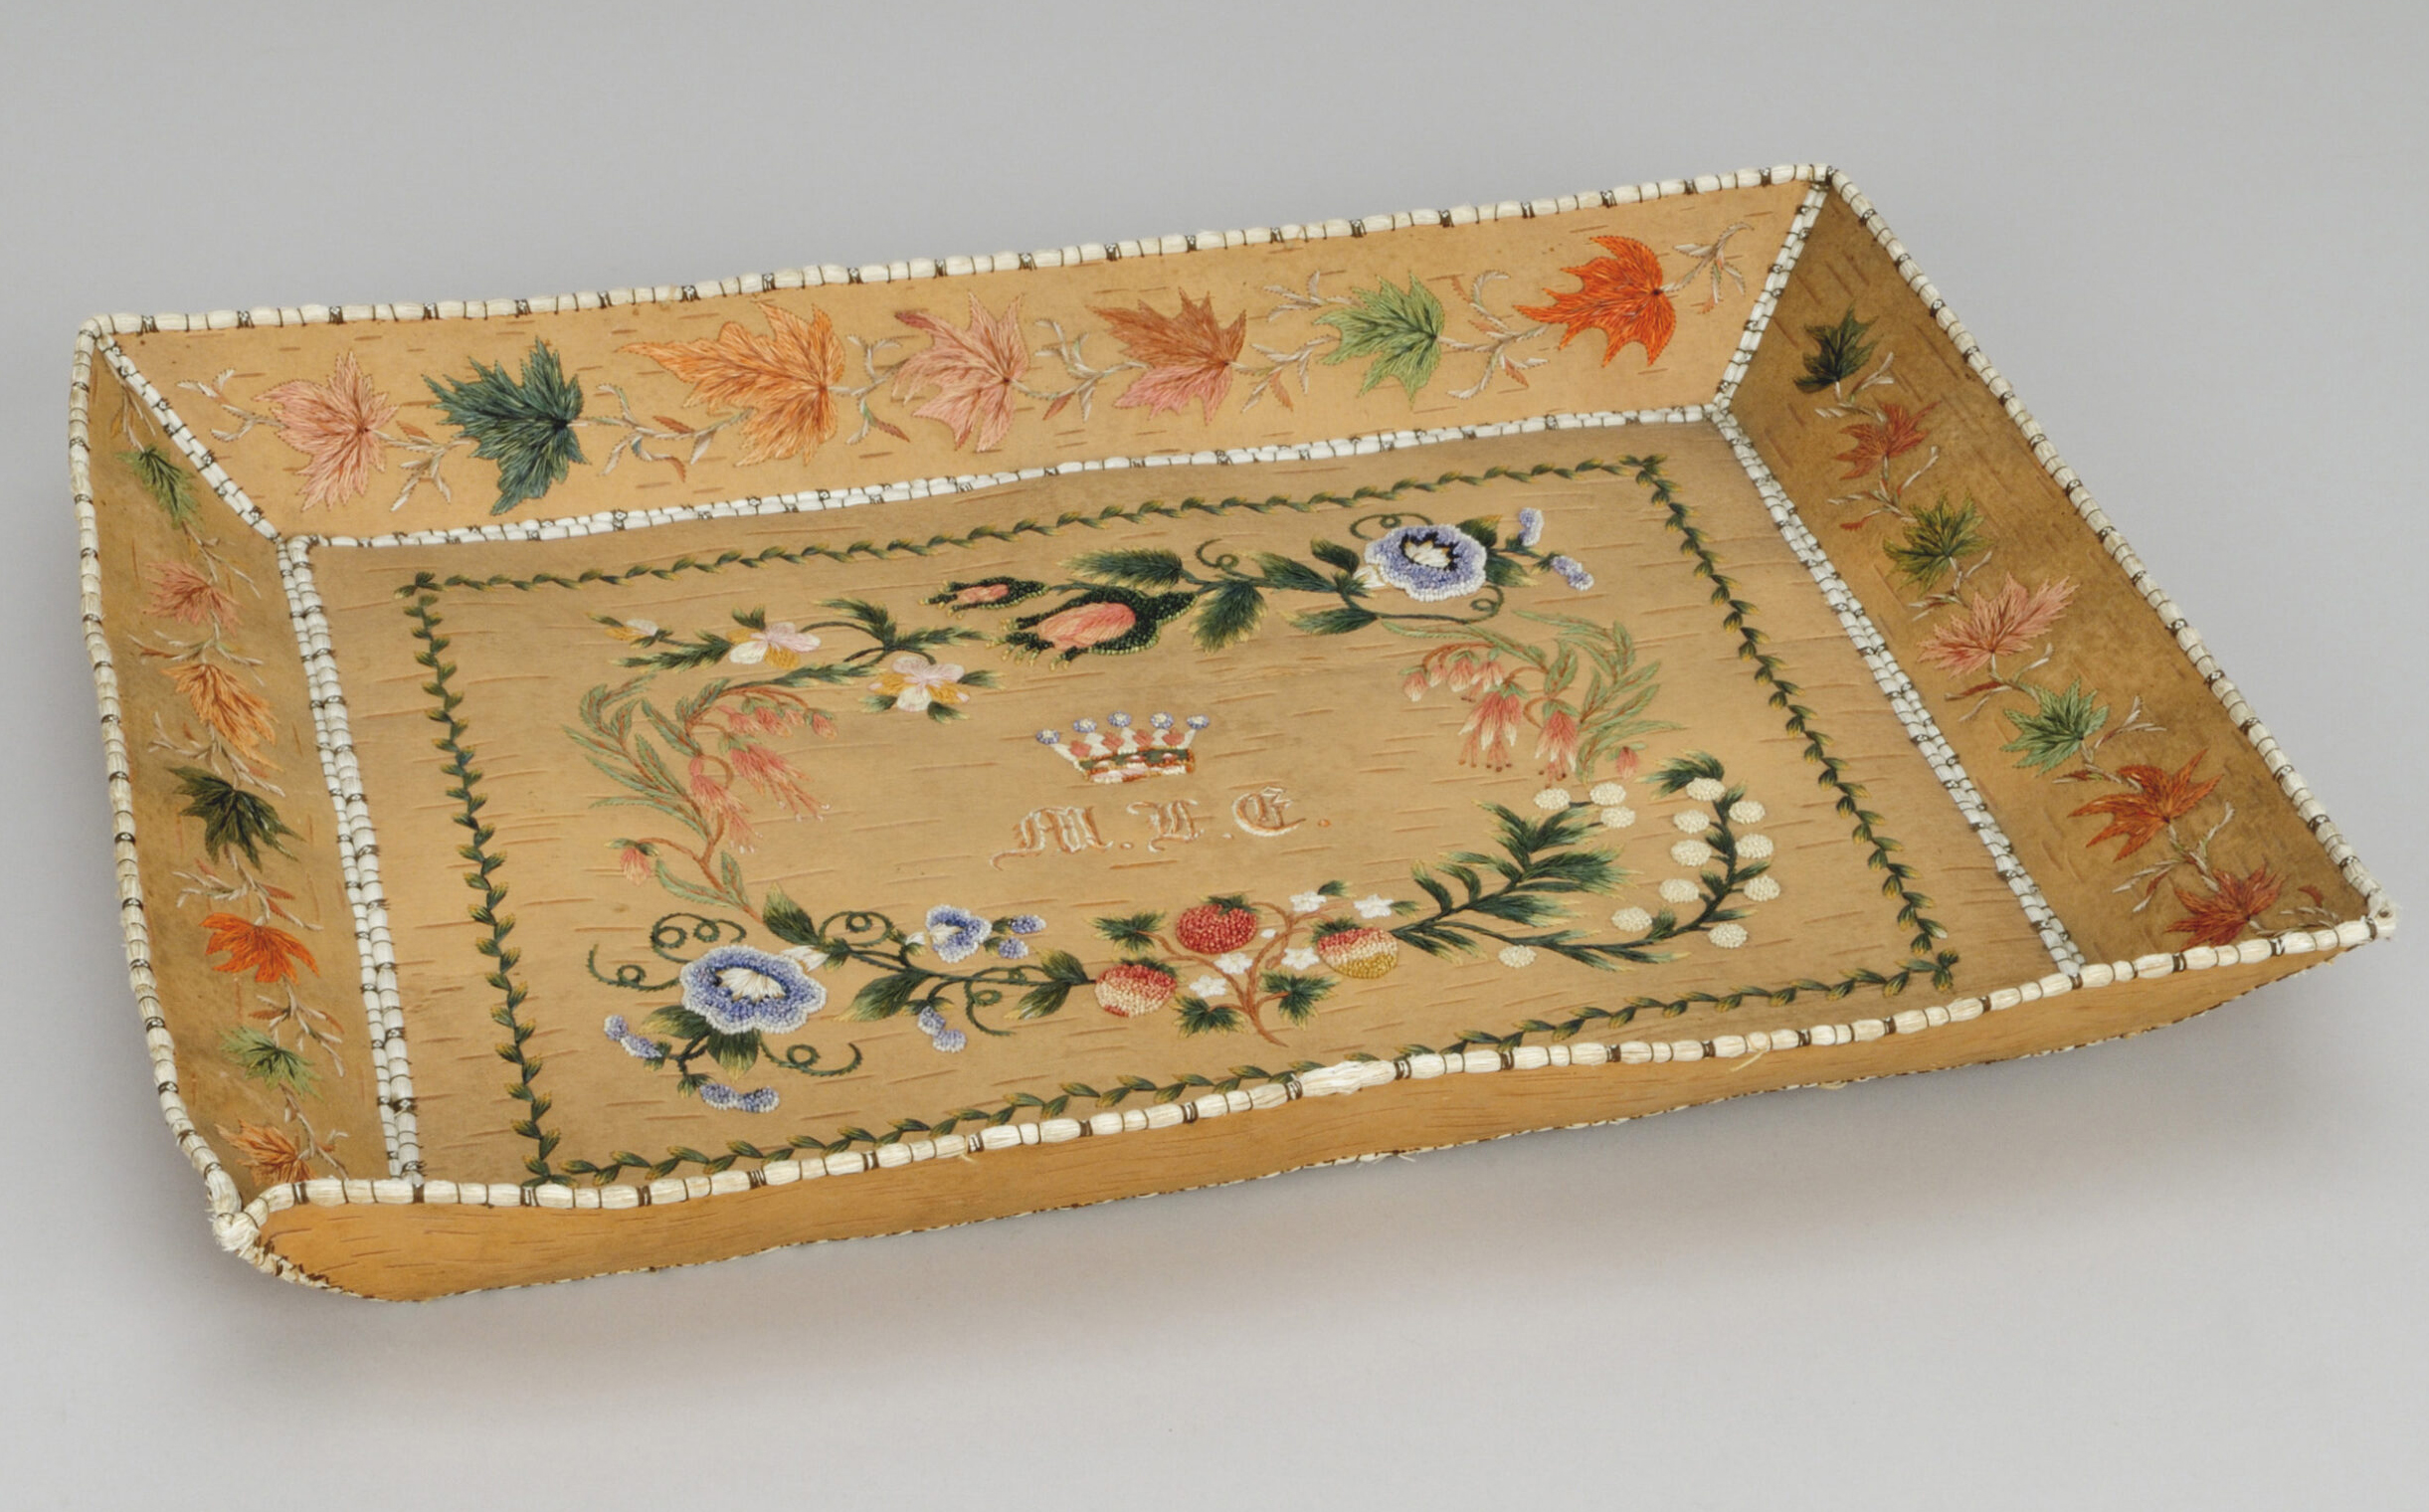 Coming Soon: Embroidered diplomacy, the Elgin Trays